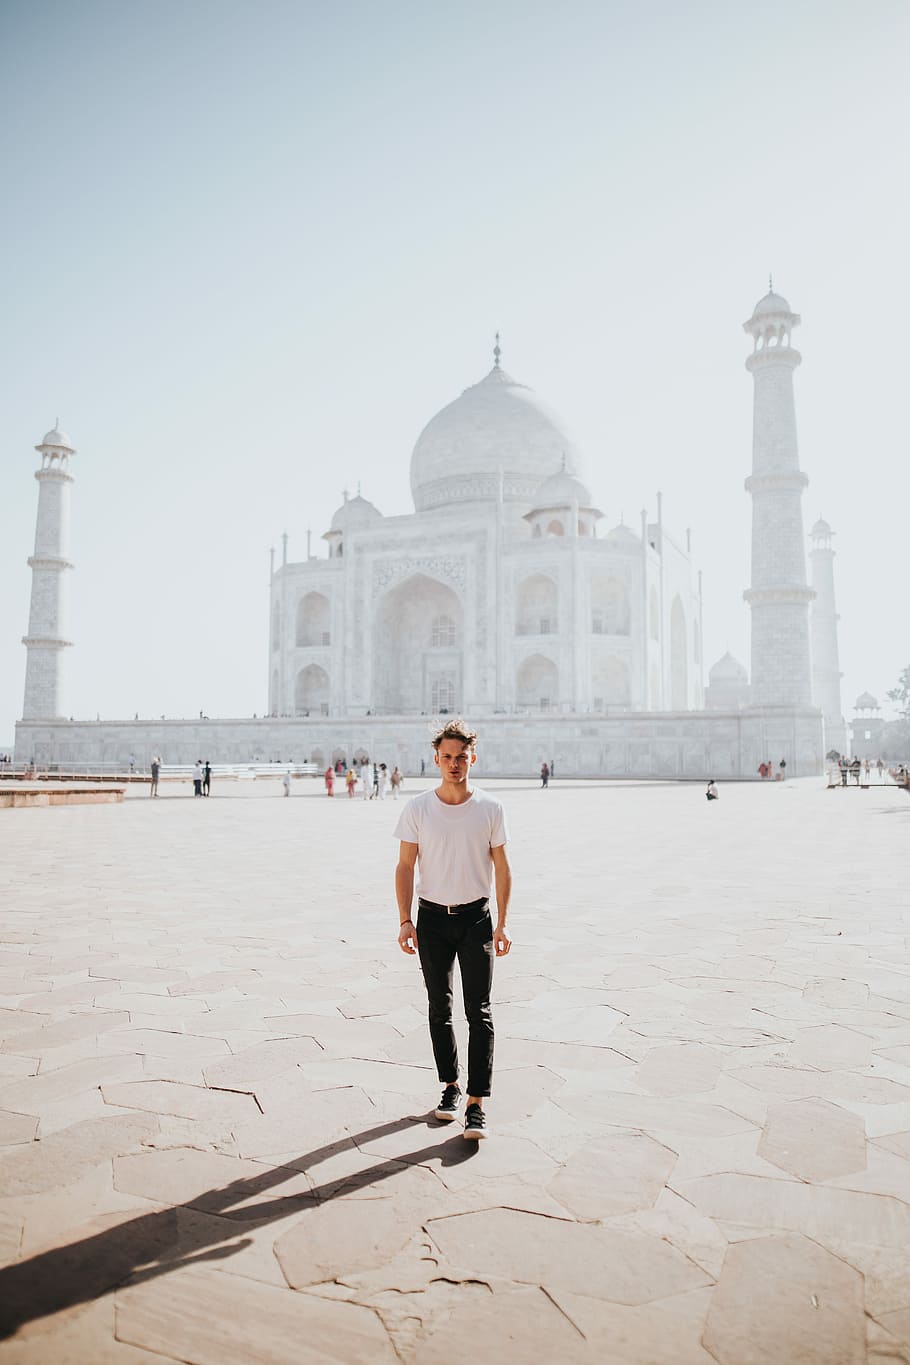 man standing near Taj Mahal, India, white concrete dome church behind man wearing white t-shirt and black pants standing on ground during daytime